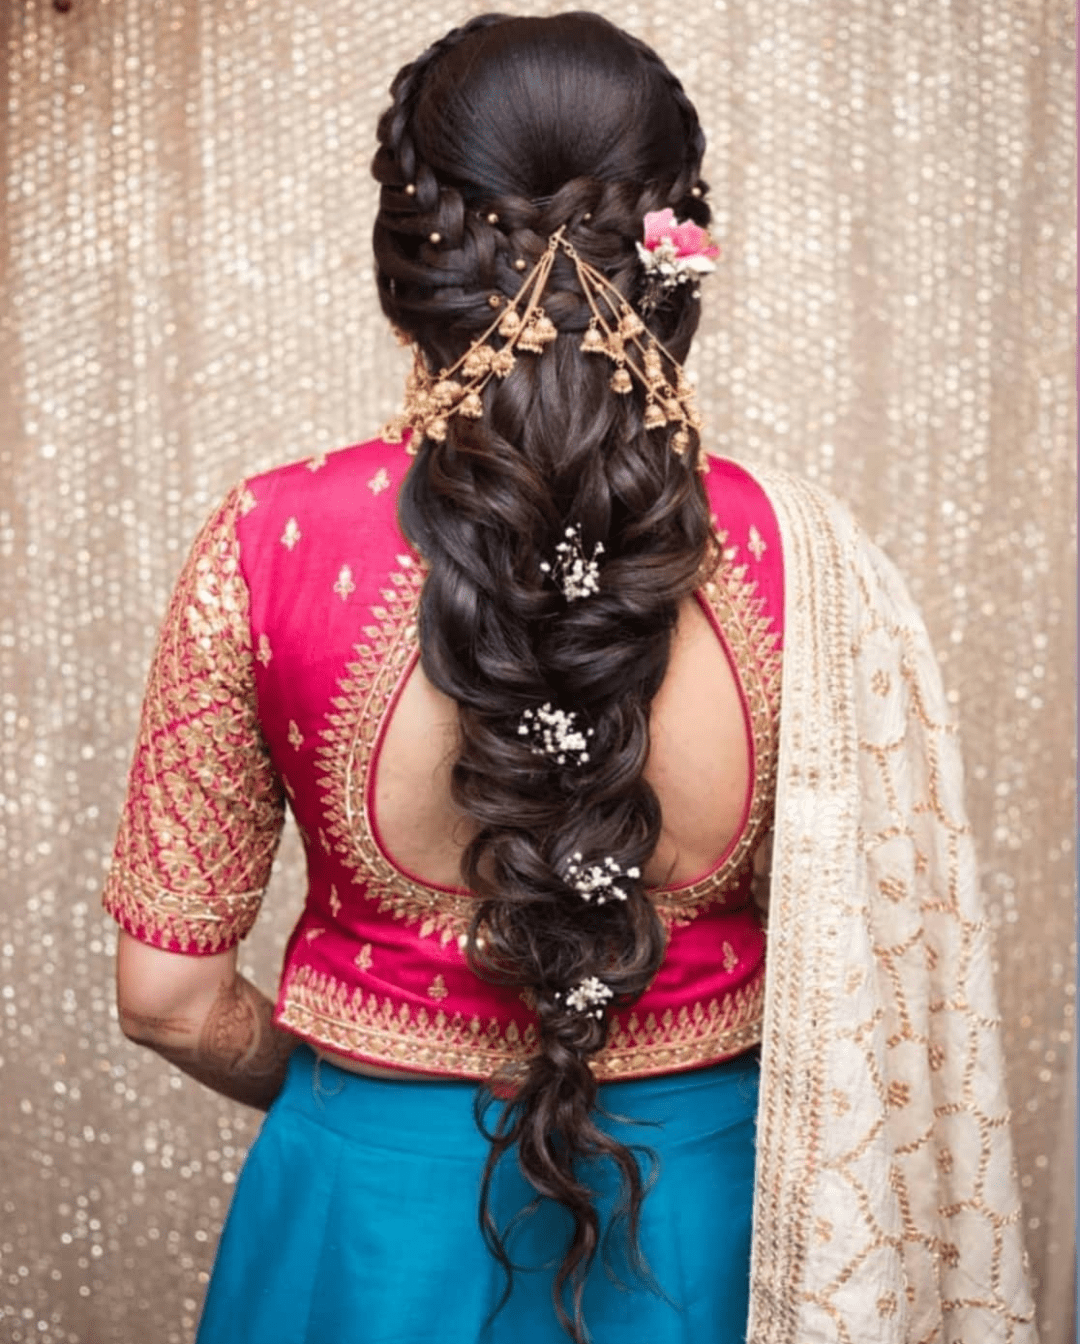 Indian Wedding Hair 101 - The Bride Hair Care Guide